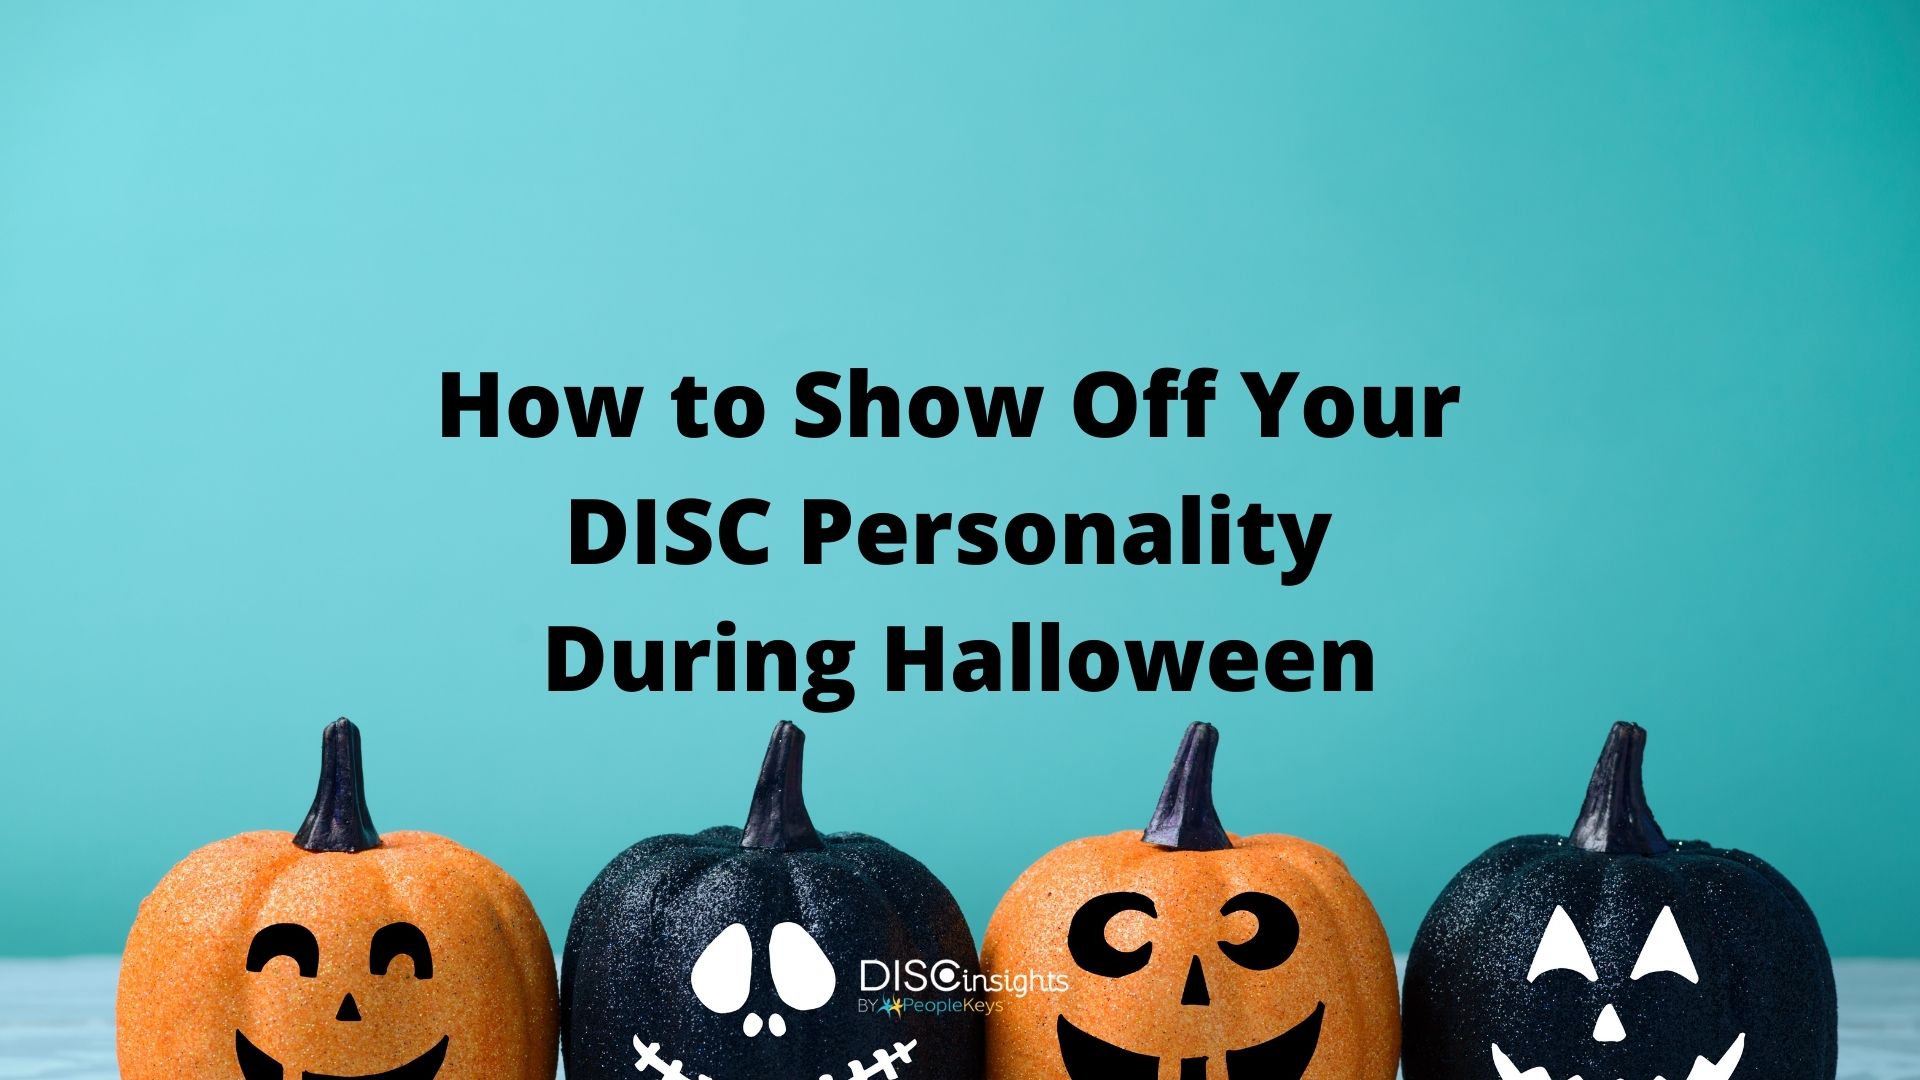 Show off your DISC personality during Halloween